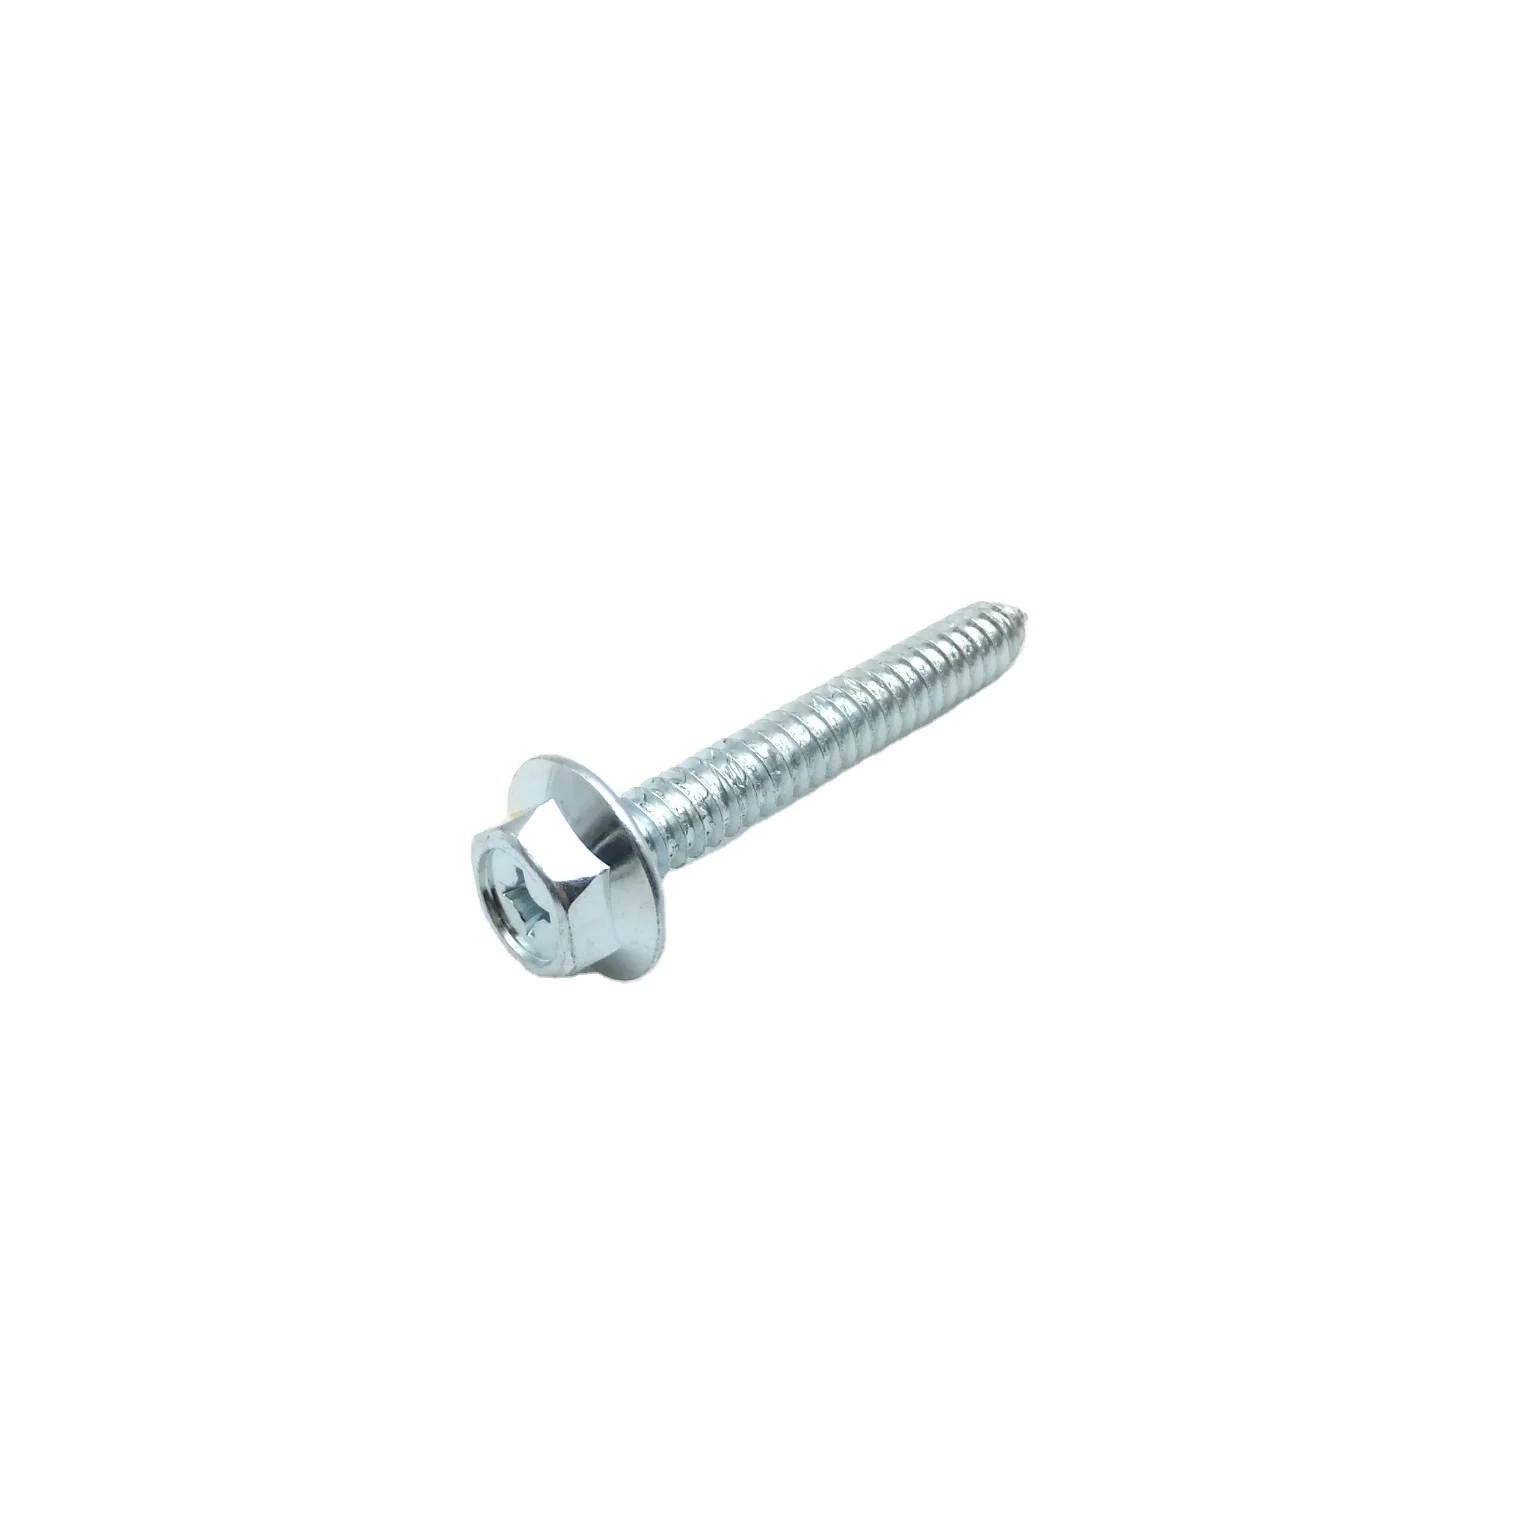 Head Cross Recessed Self Tapping Mini Screws For Small Appliances Galvanized Hexagonal Head stainless steel self drilling screw